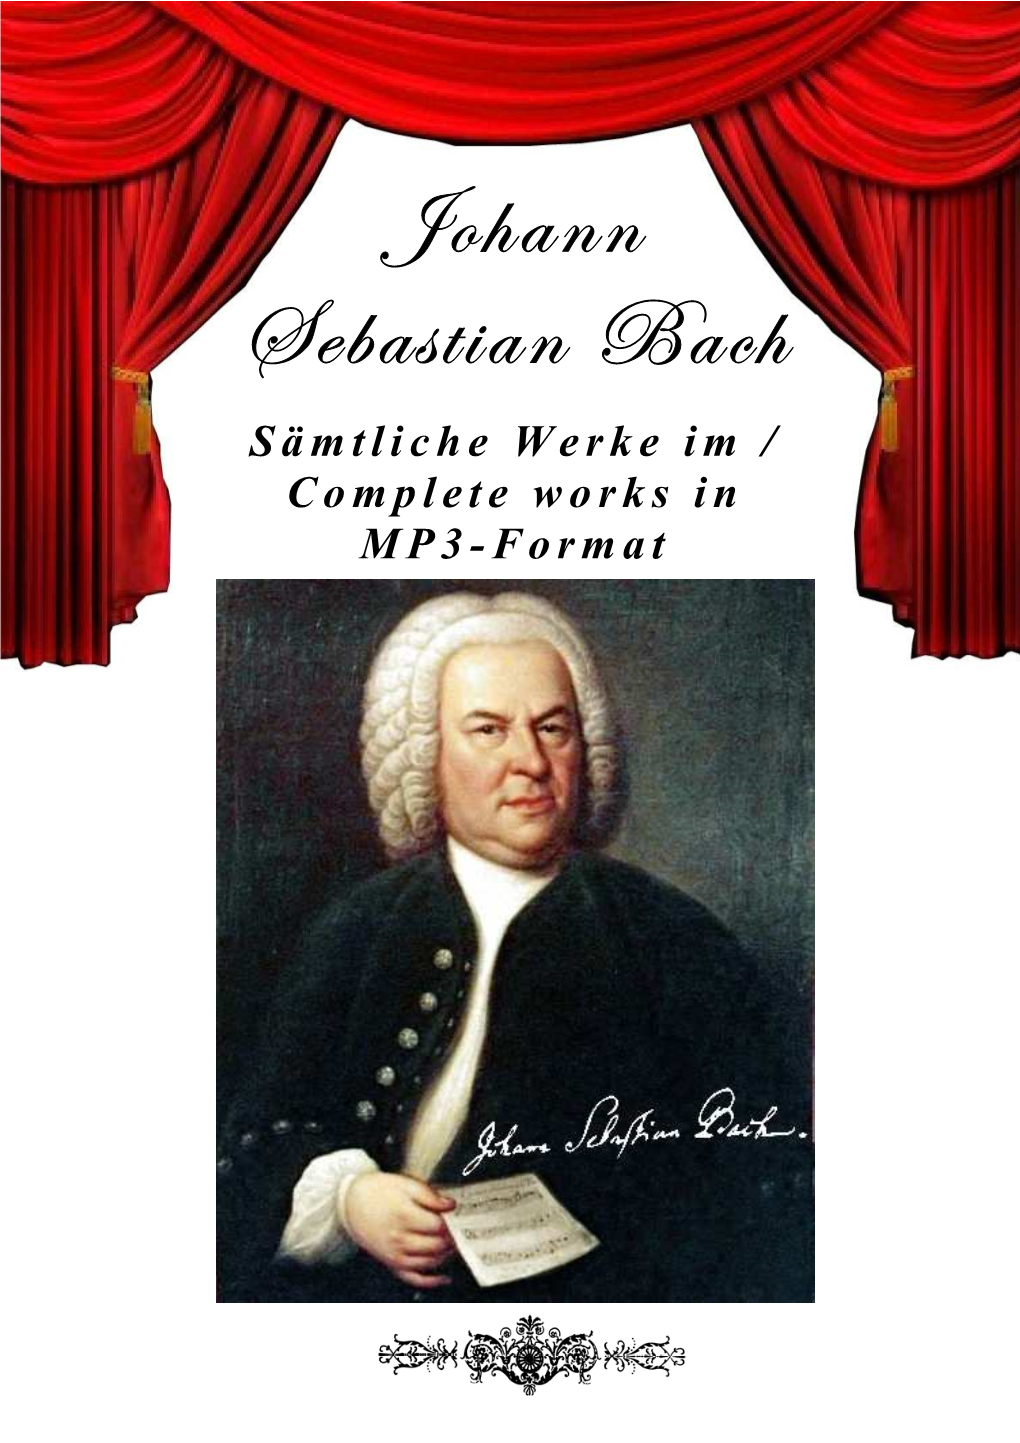 Bach-DVD Complete Details